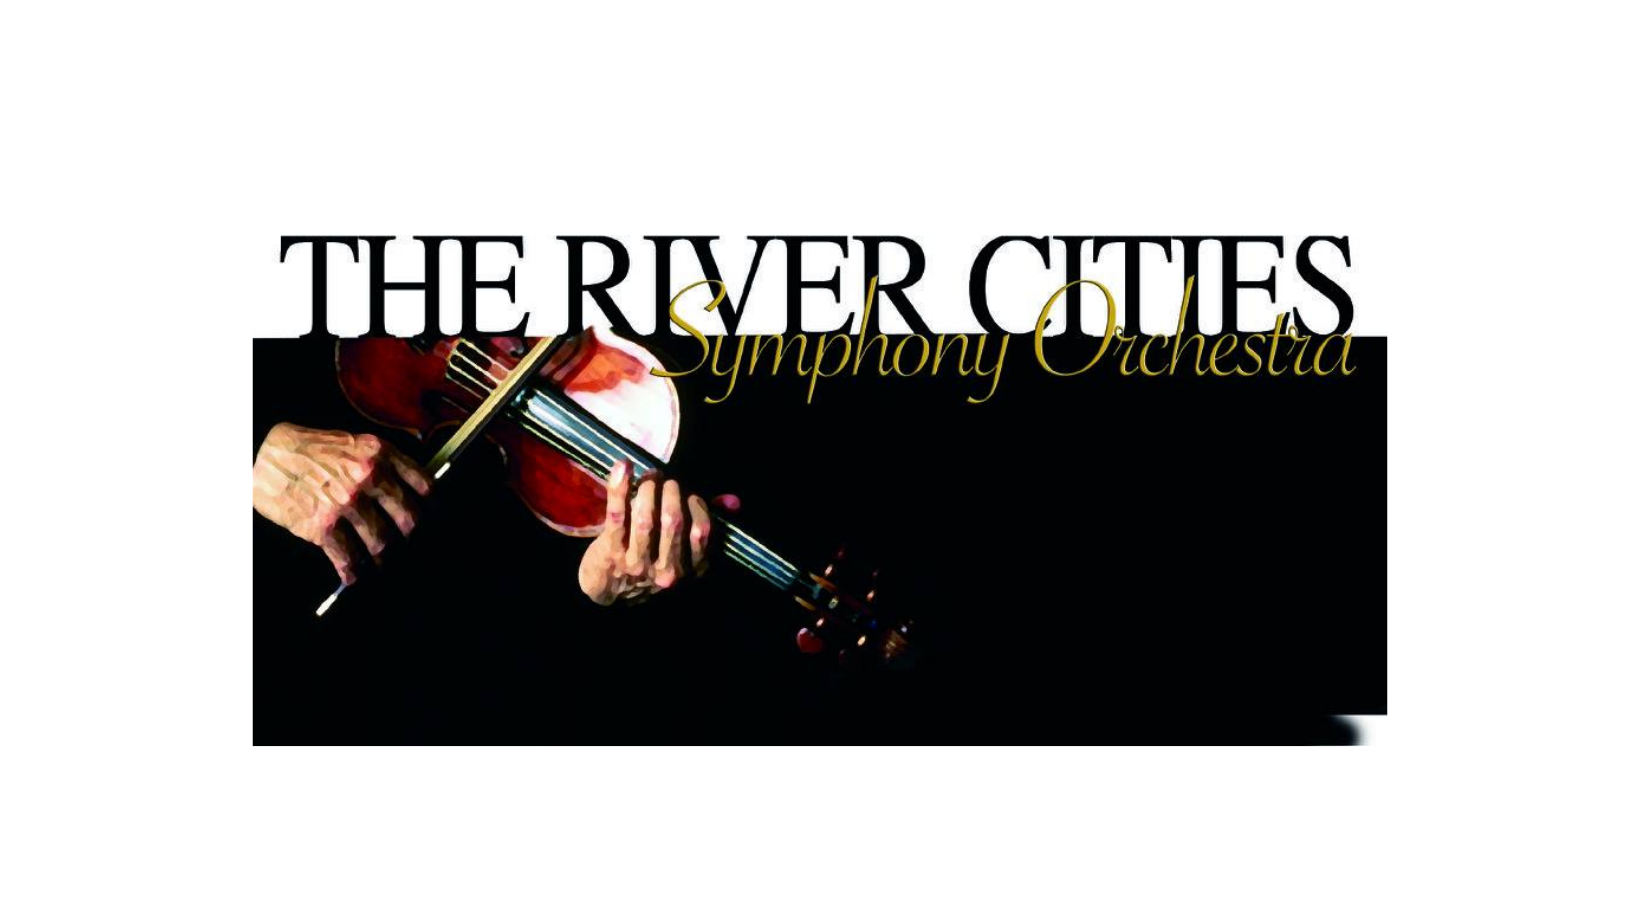 RIVER CITIES SYMPHONY ORCHESTRA Peoples Bank Theatre